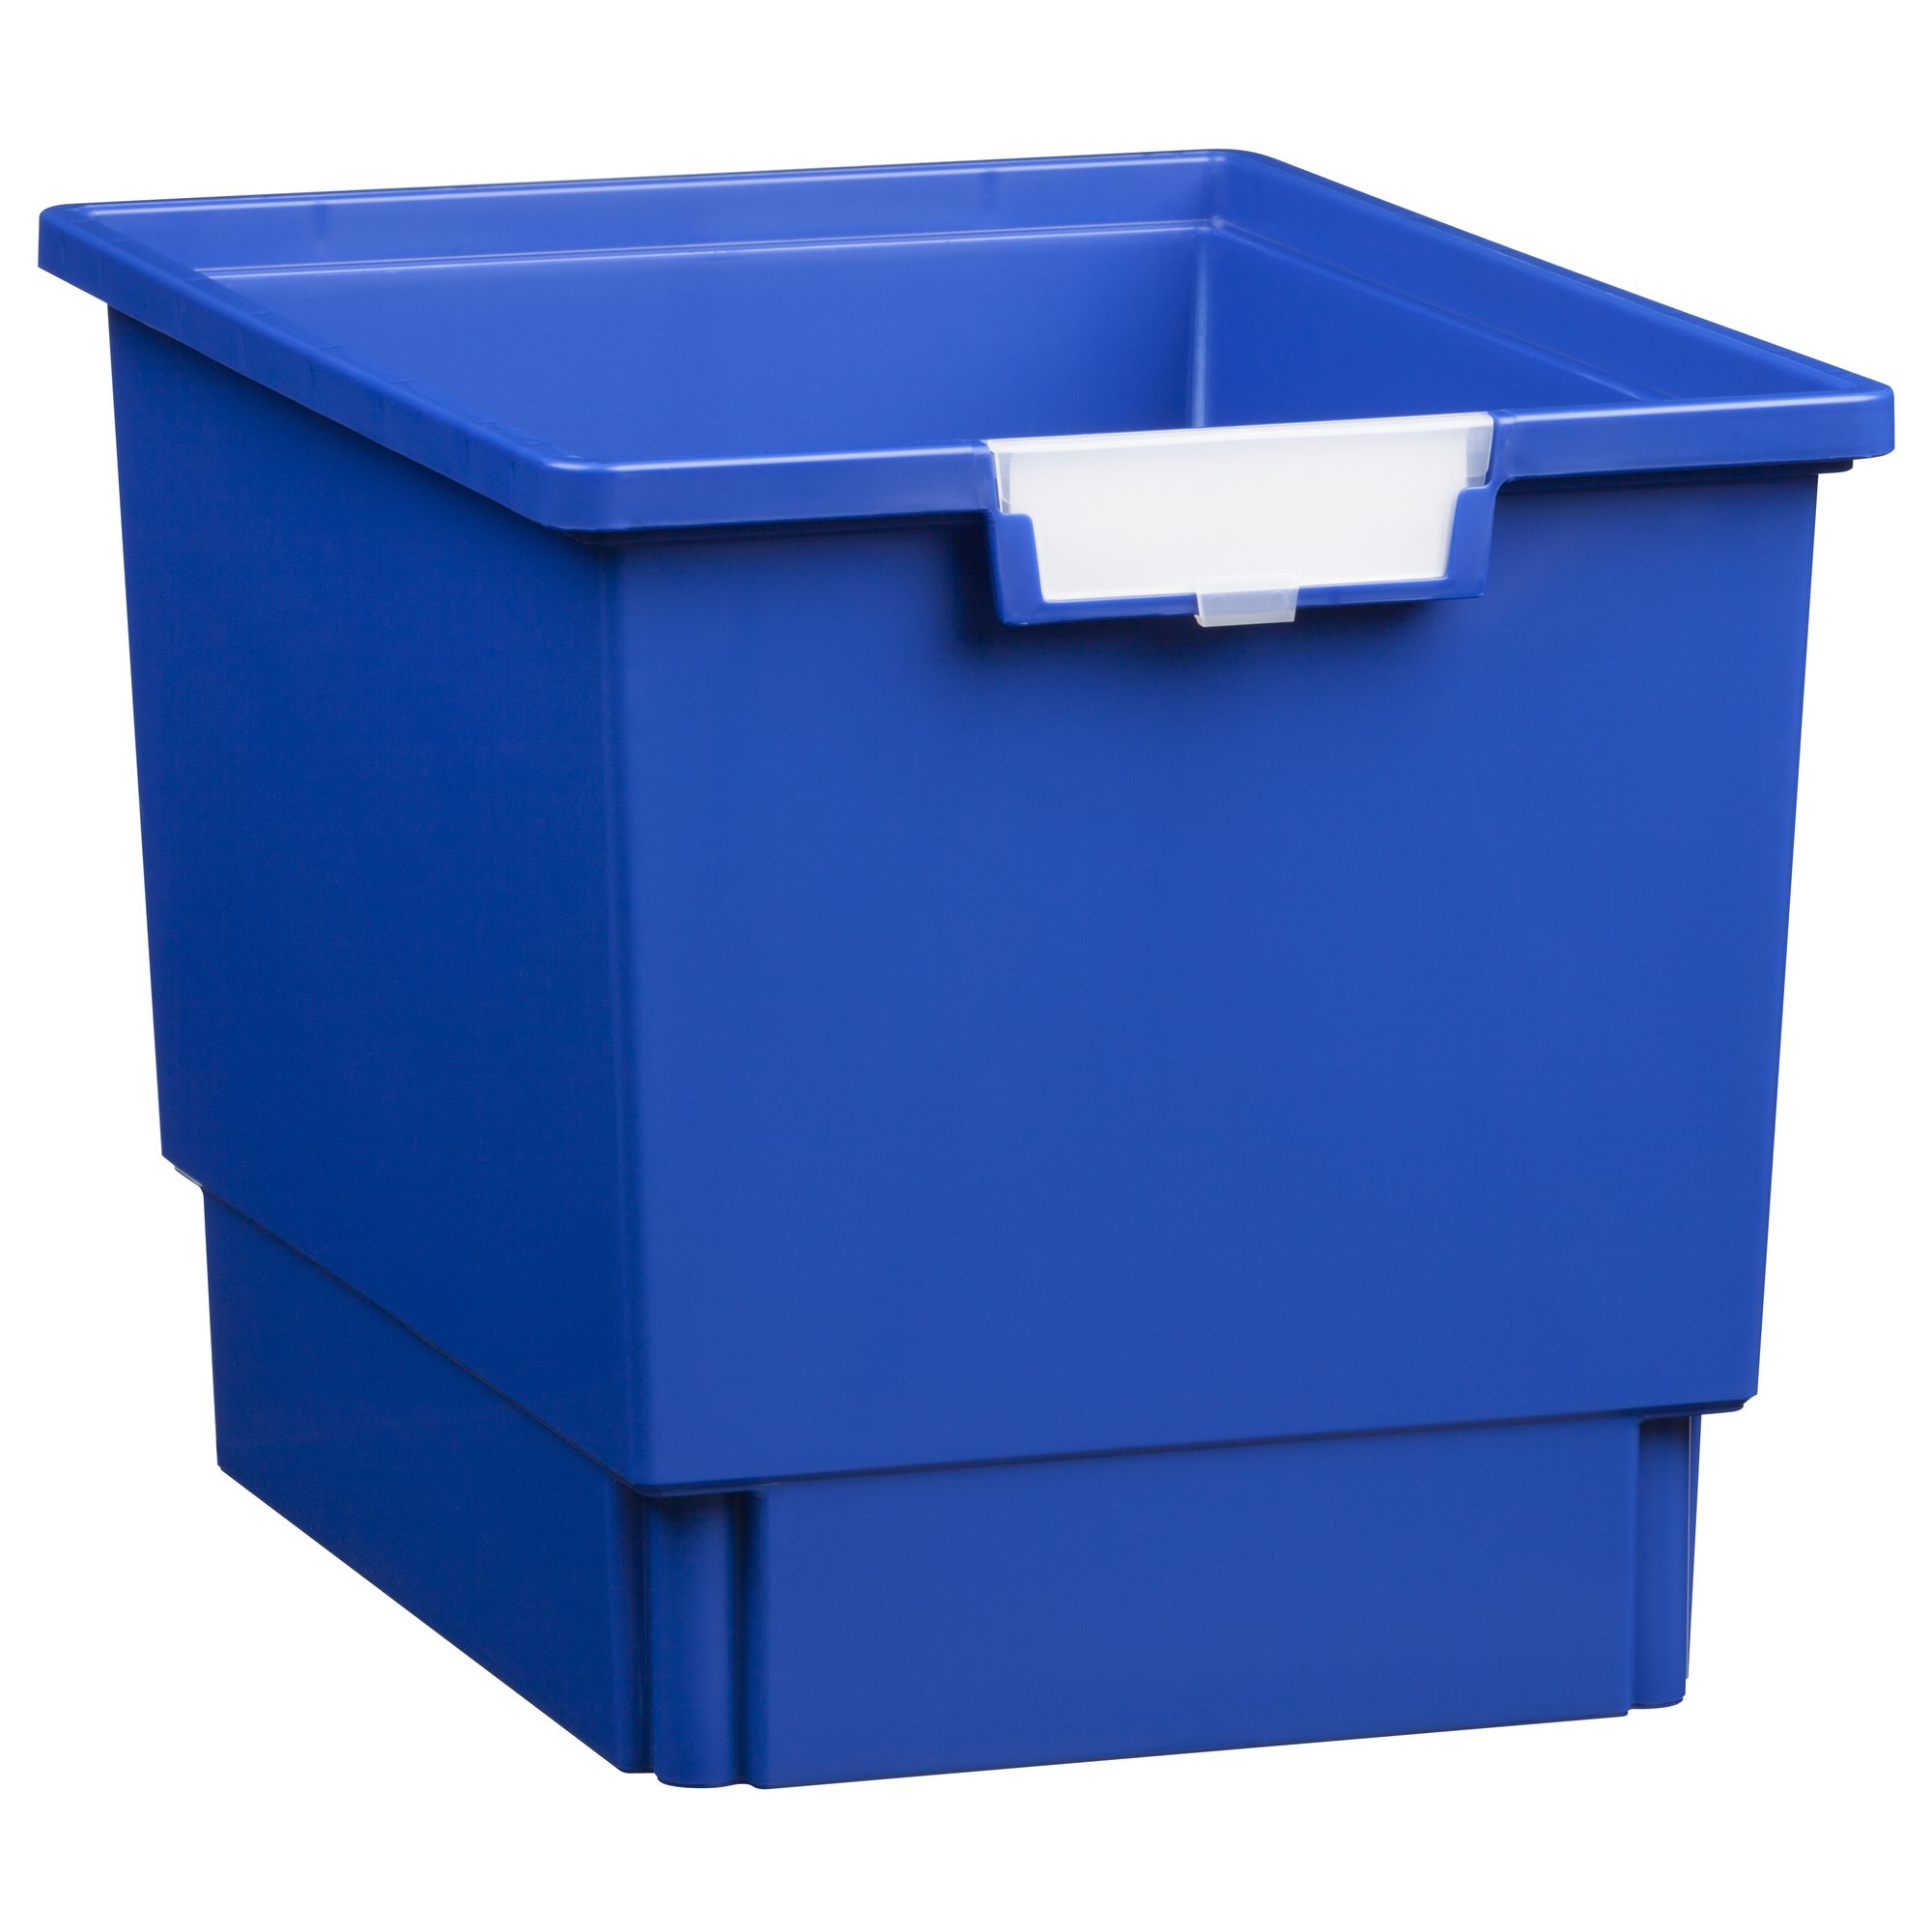 Certwood StorWerks, Slim Line 12Inch Tray in Primary Blue-1PK, Included (qty.) 1 Height 12 in, Model CE1954PB1